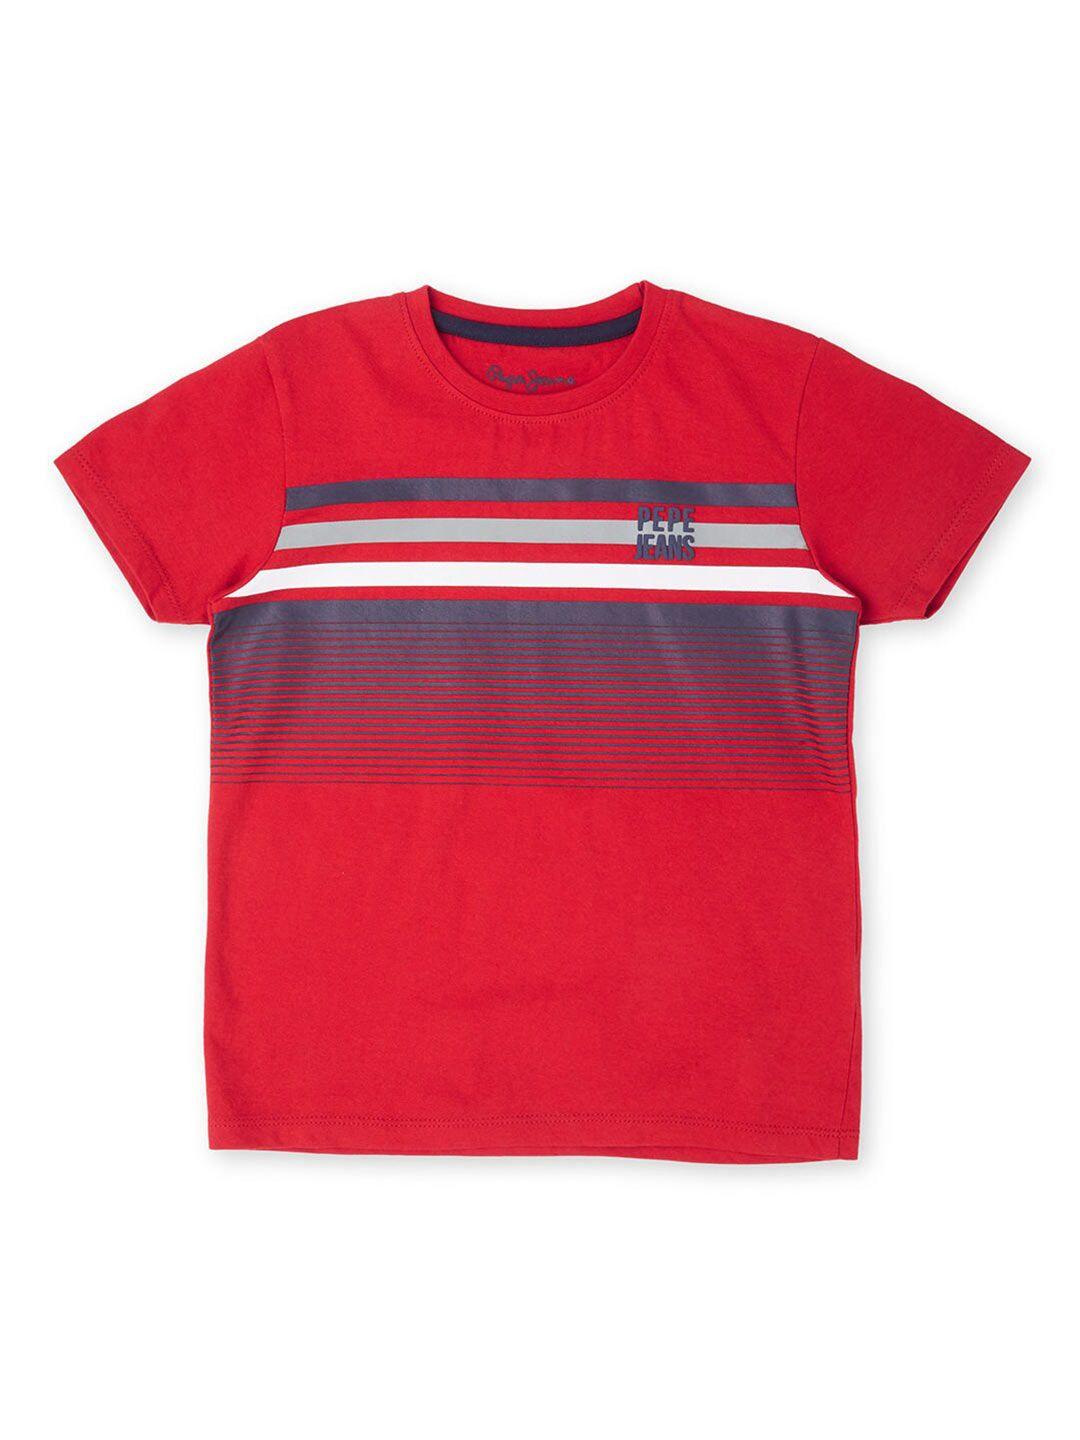 pepe jeans boys red striped applique t-shirt